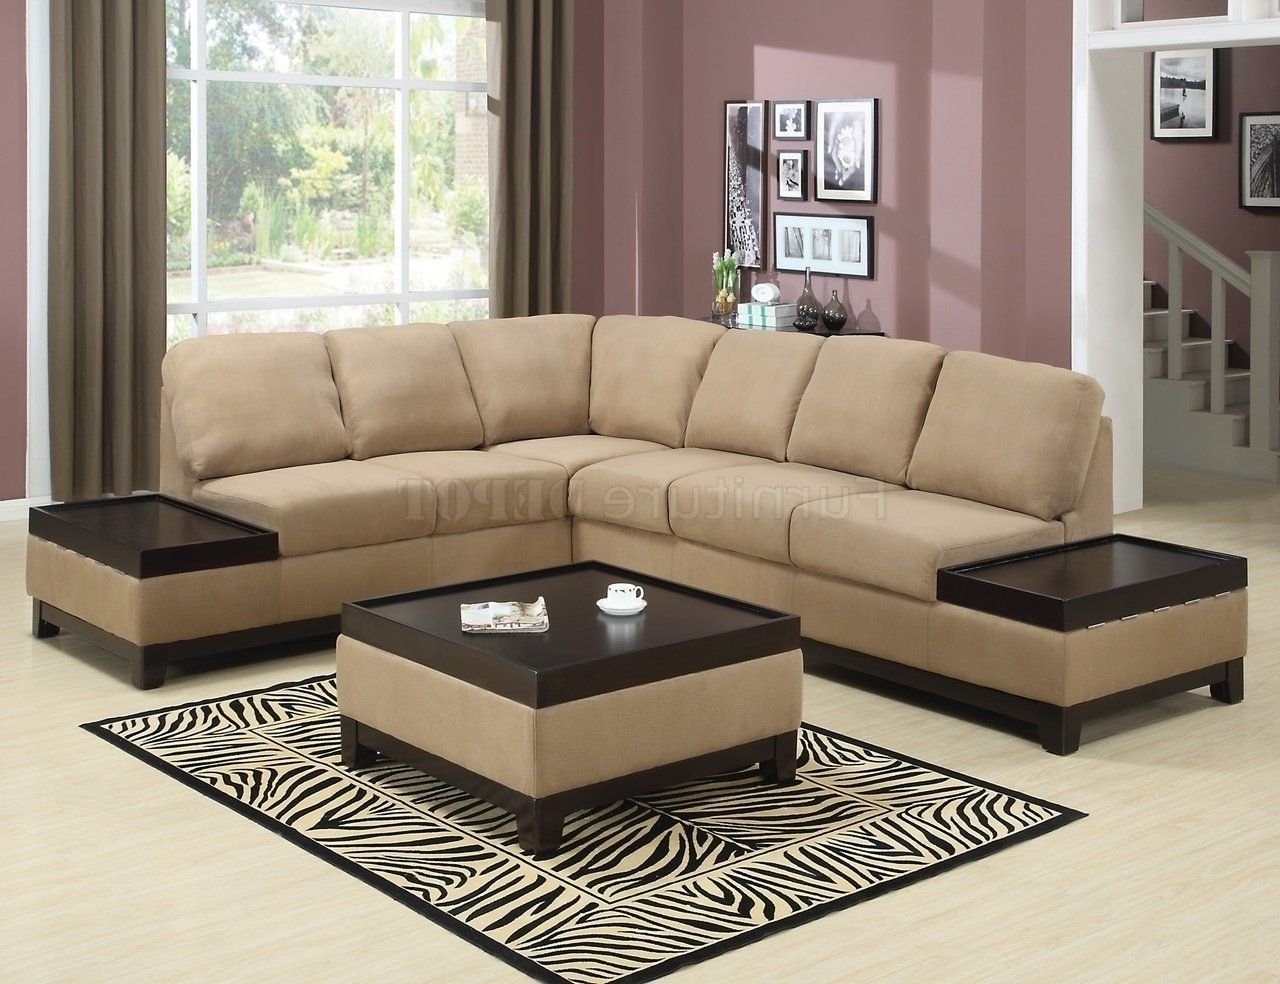 Sectional Sofas Tulsa | Book Of Stefanie With Tulsa Sectional Sofas (View 7 of 10)